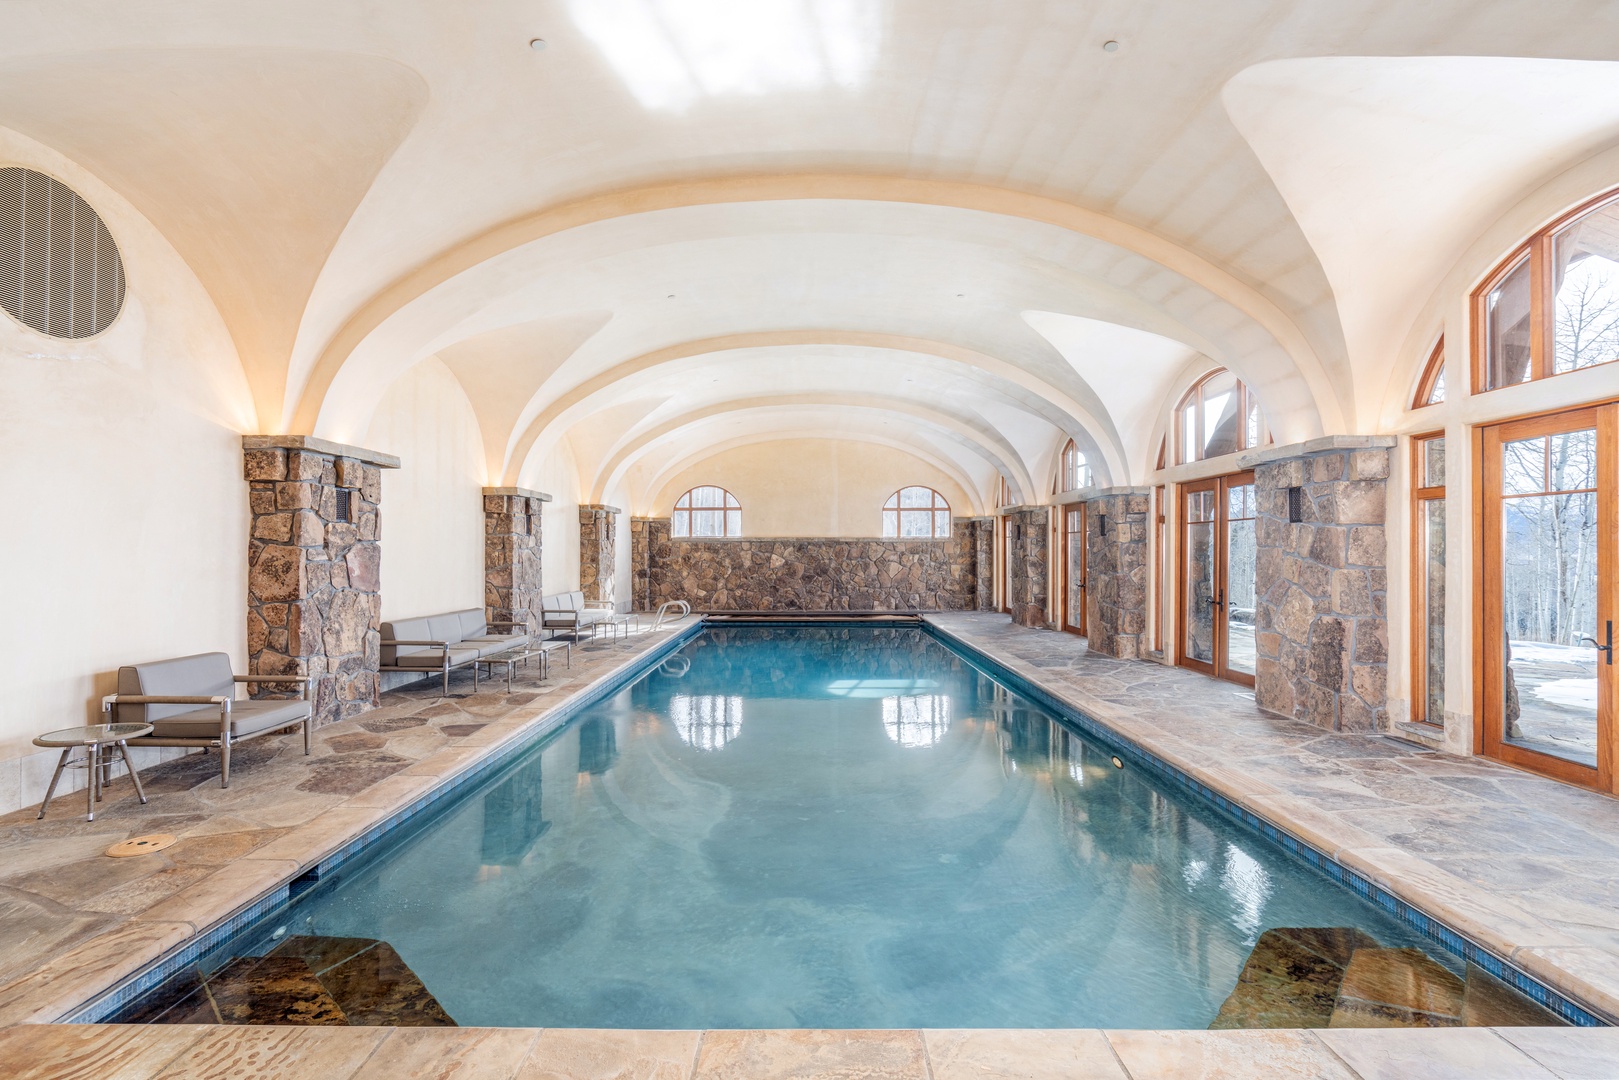 Touchdown's heated, private pool